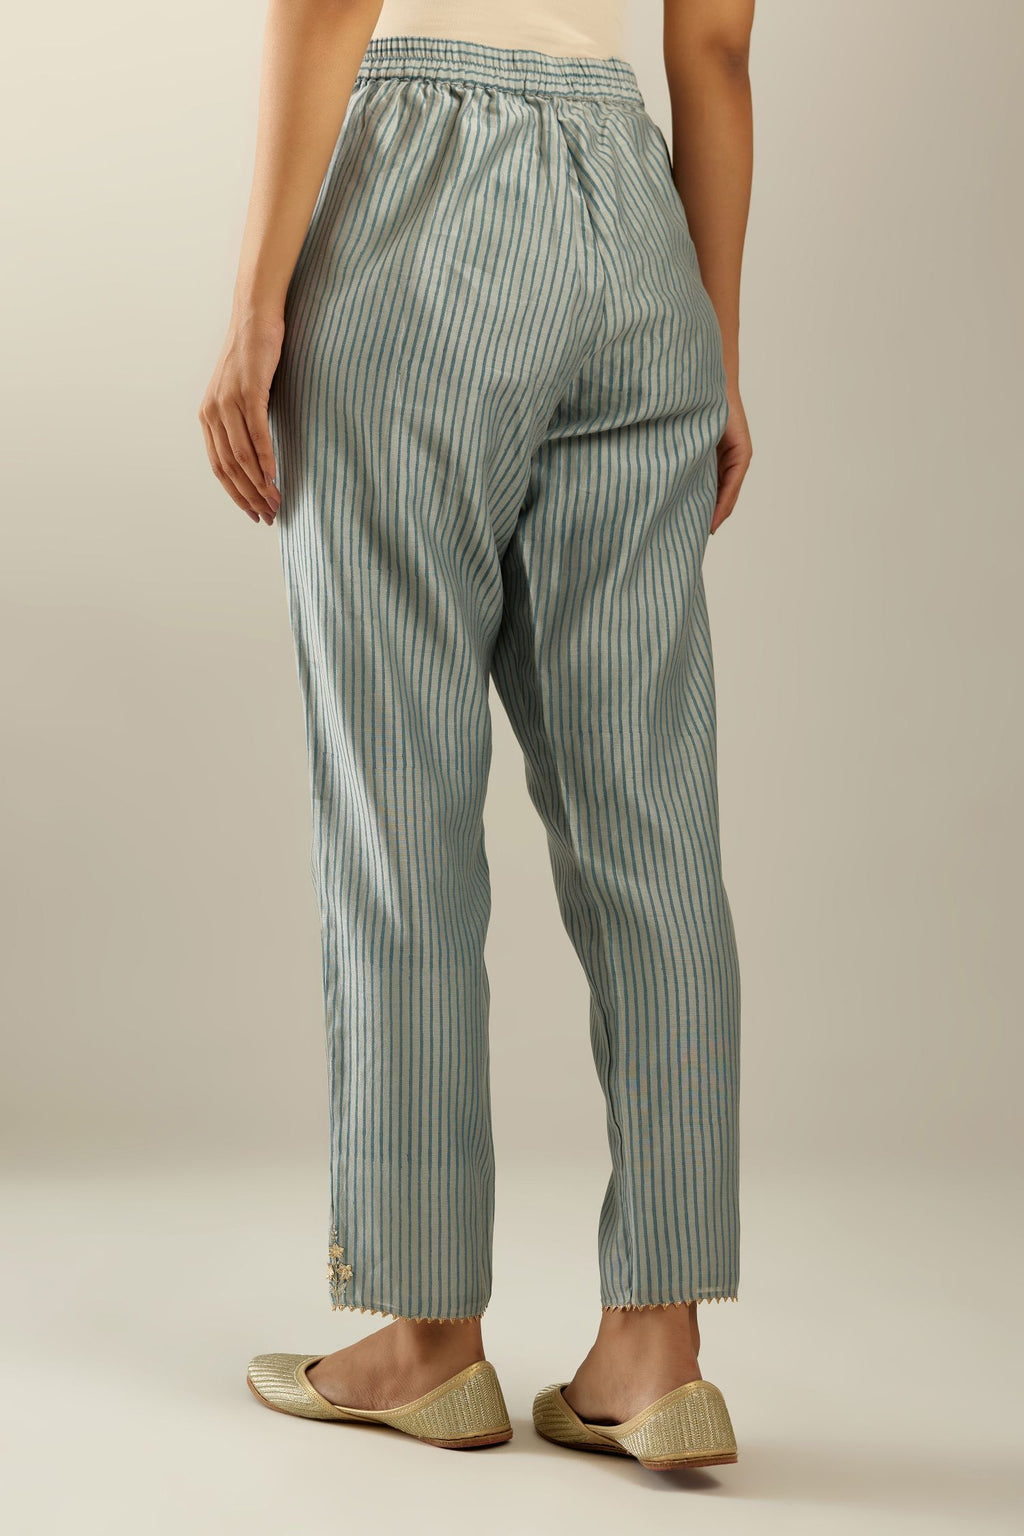 Blue striped hand block printed silk chanderi pants, highlighted with gota and zari embroidery at hem.